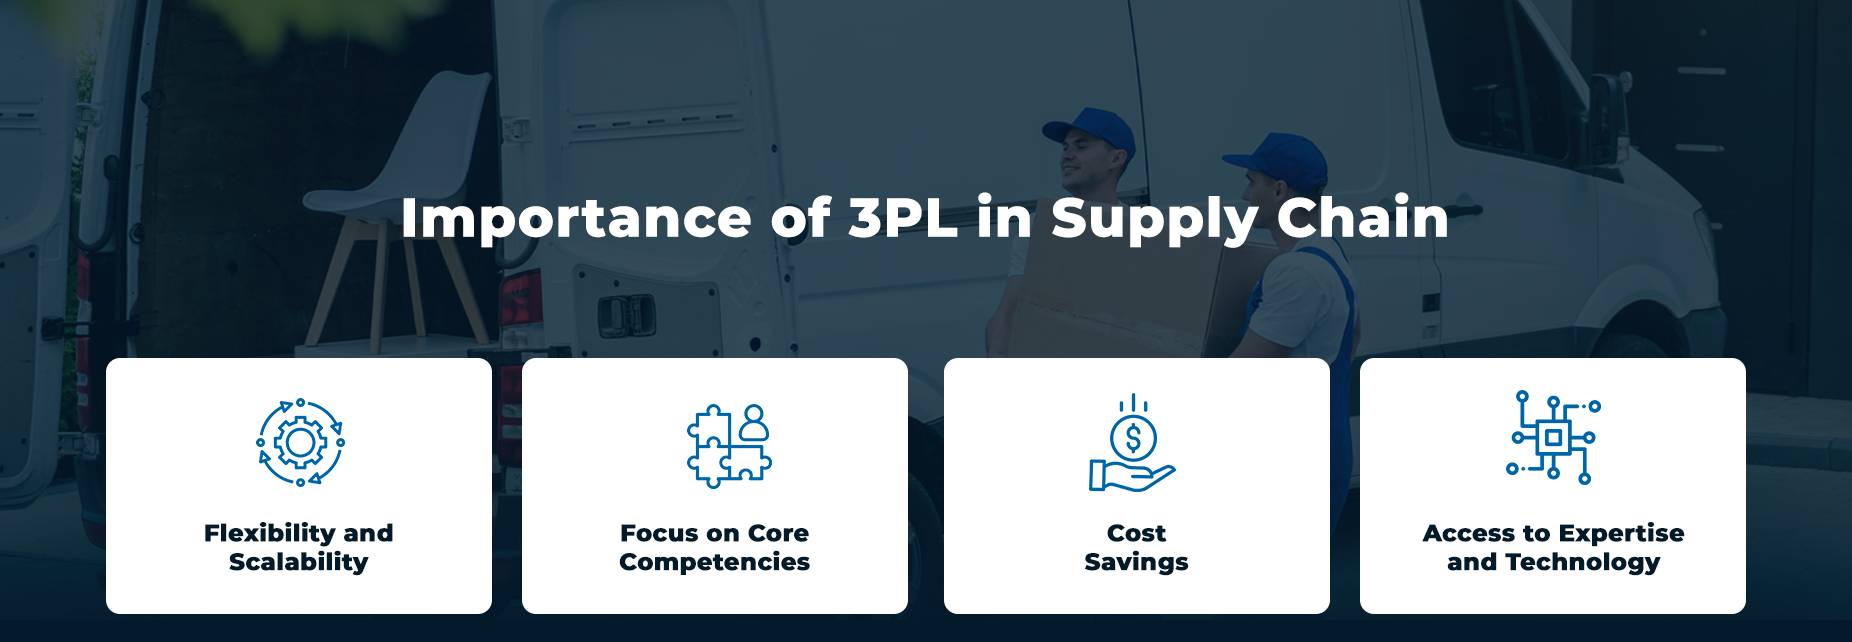 Importance of 3PL in Supply Chain